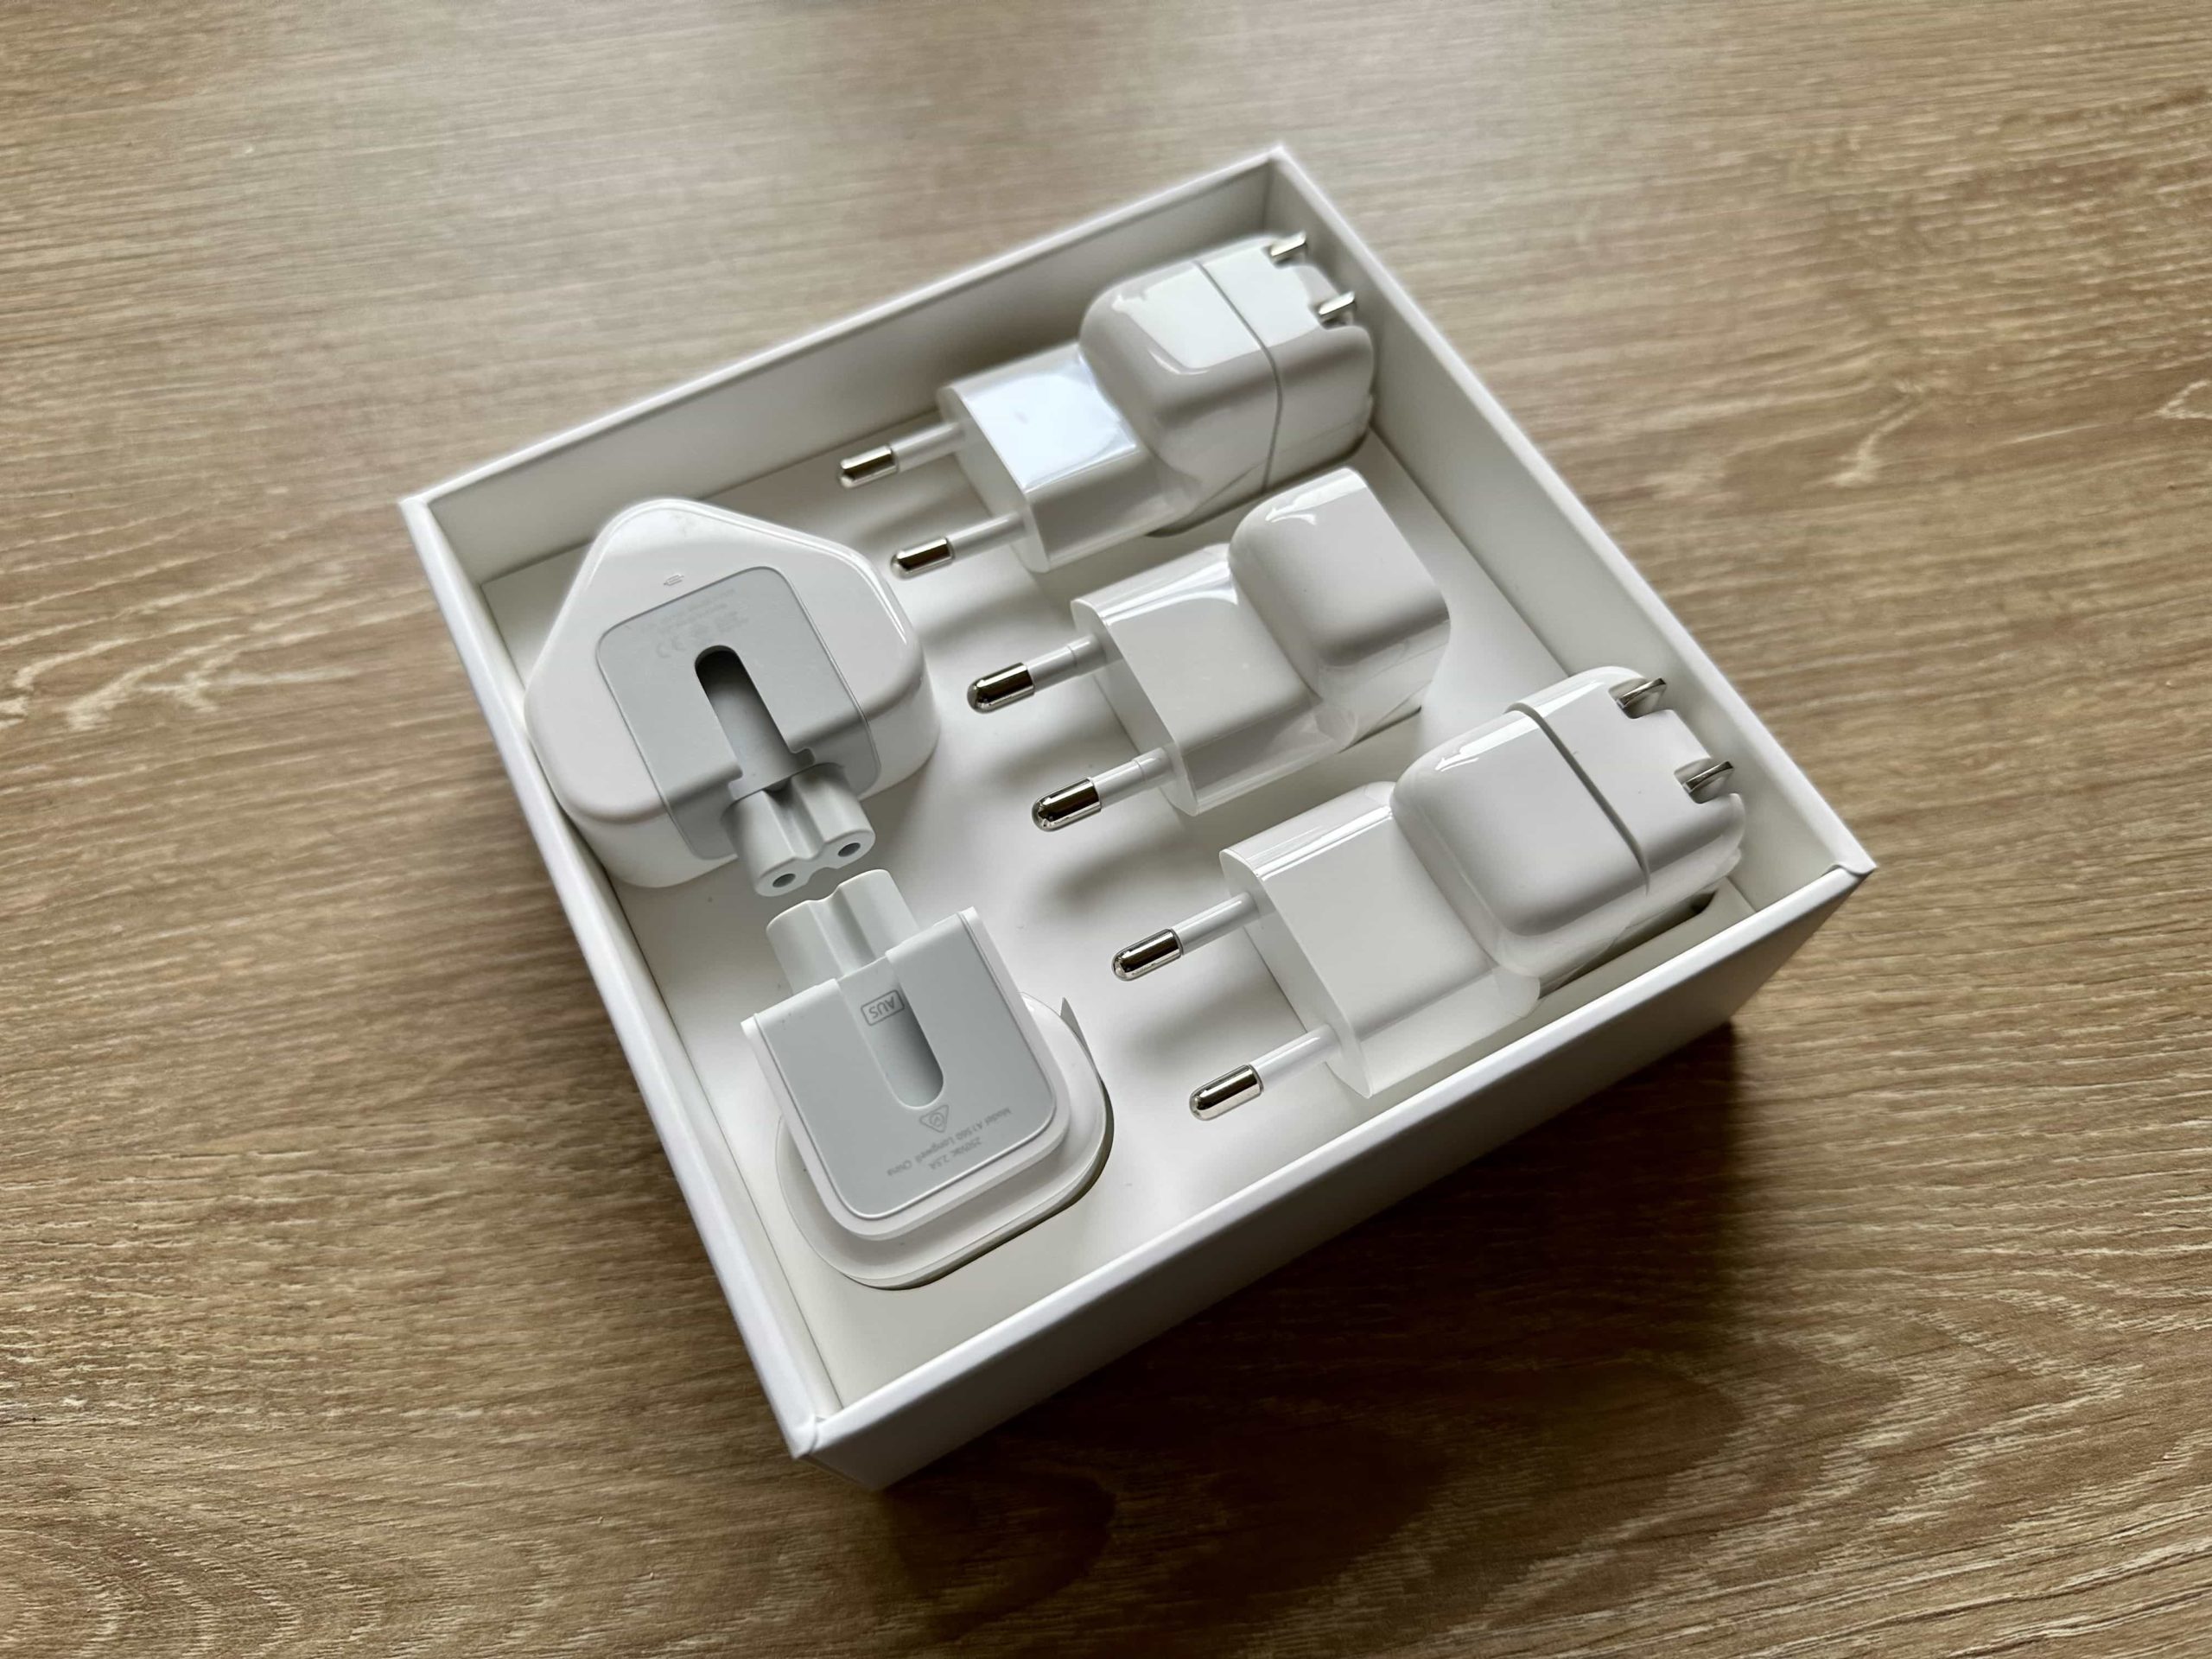 A box of power adapters for different regions and countries